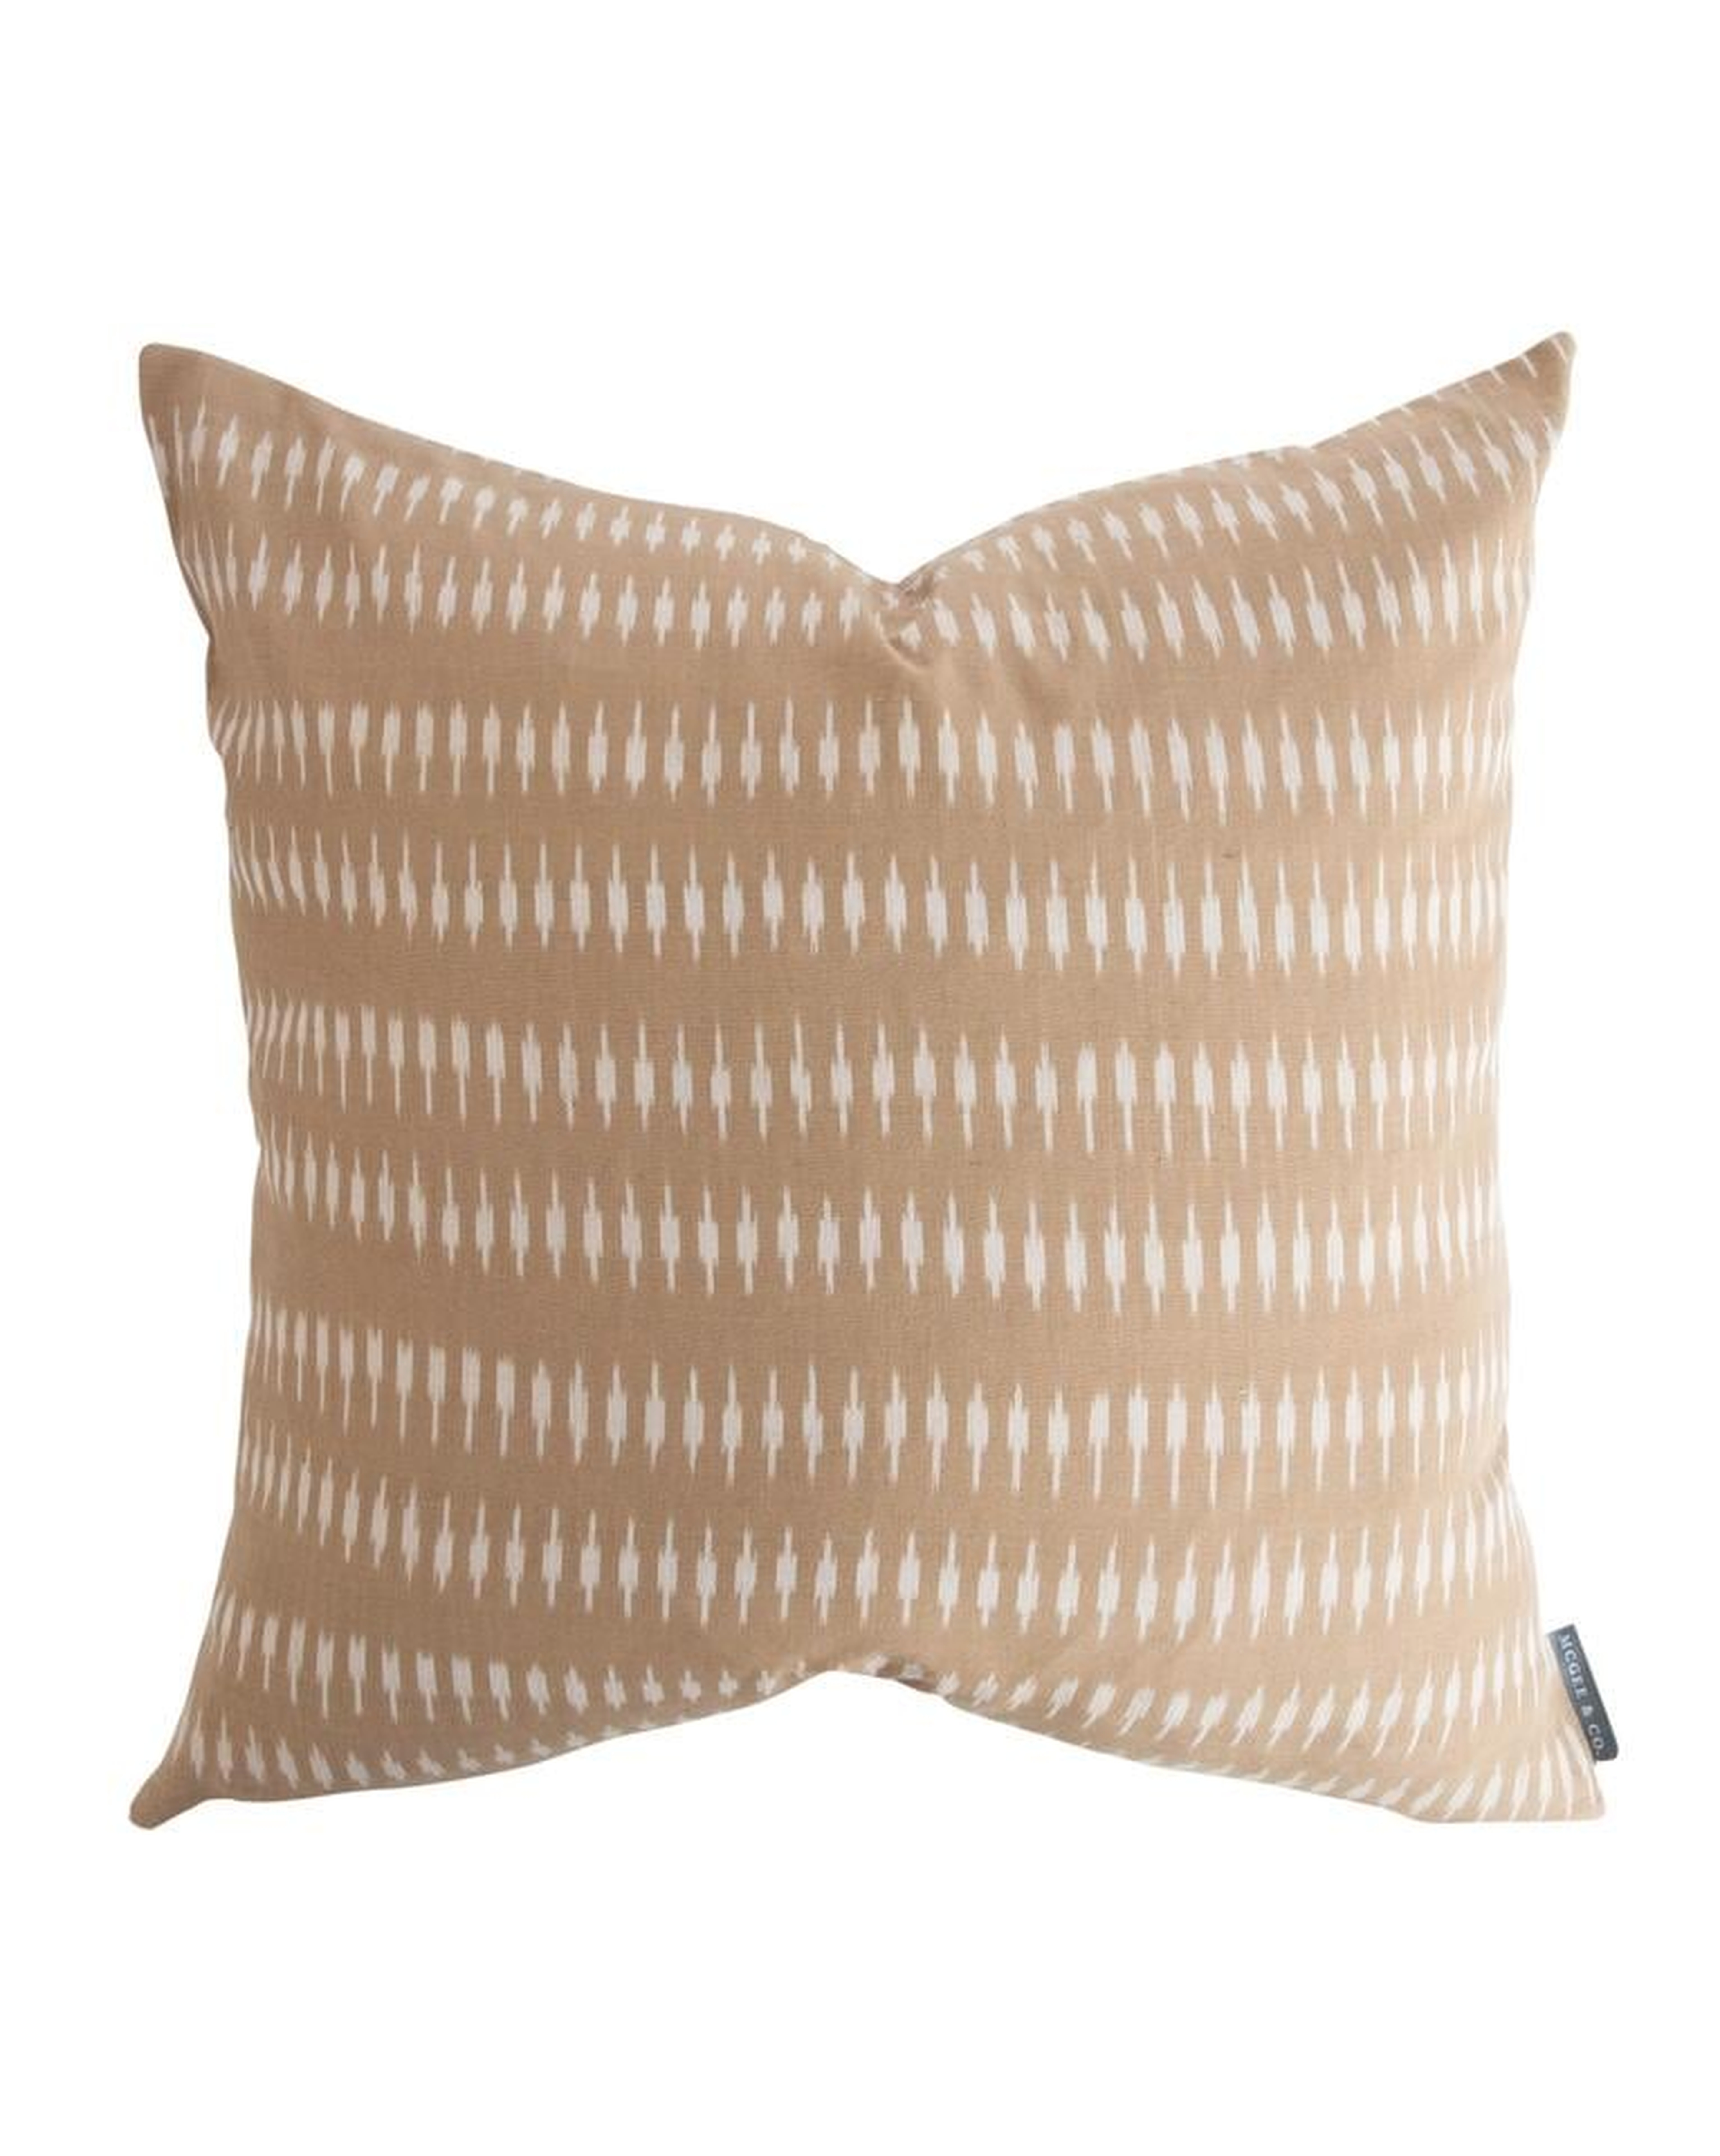 LYLE PILLOW COVER - McGee & Co.